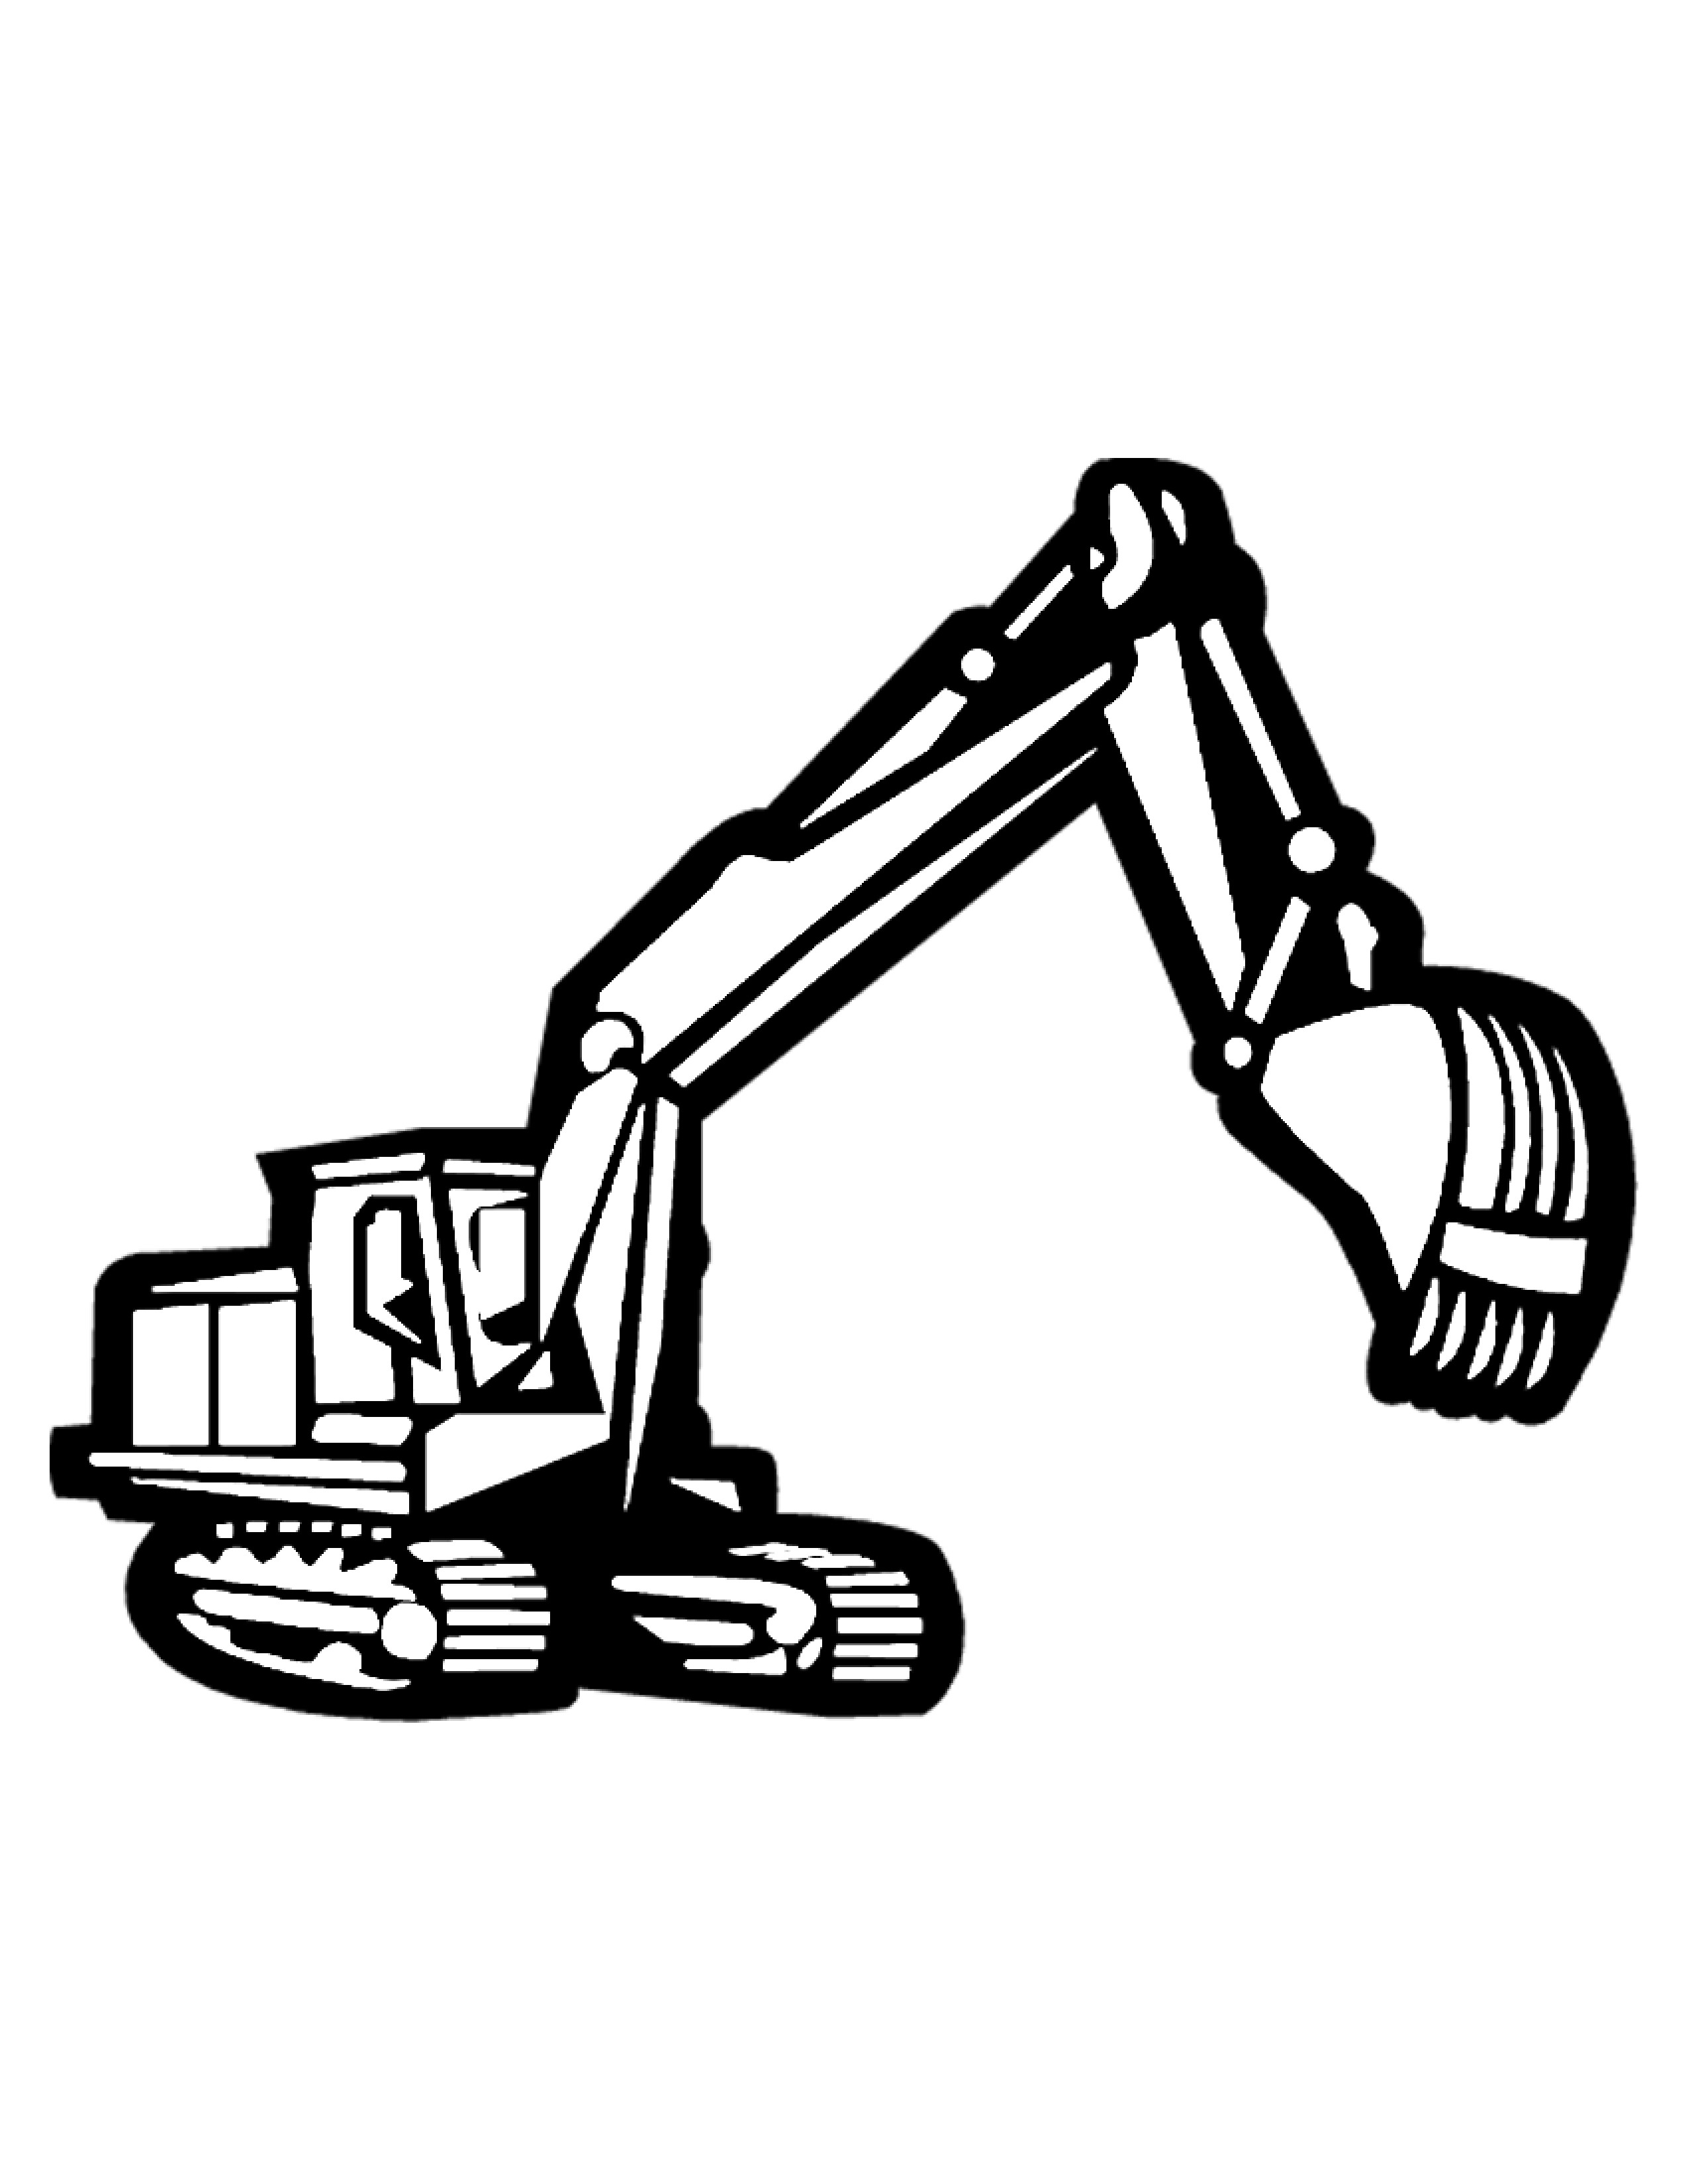 Construction Equipment Coloring Pages - Free ... - ClipArt Best - ClipArt  Best